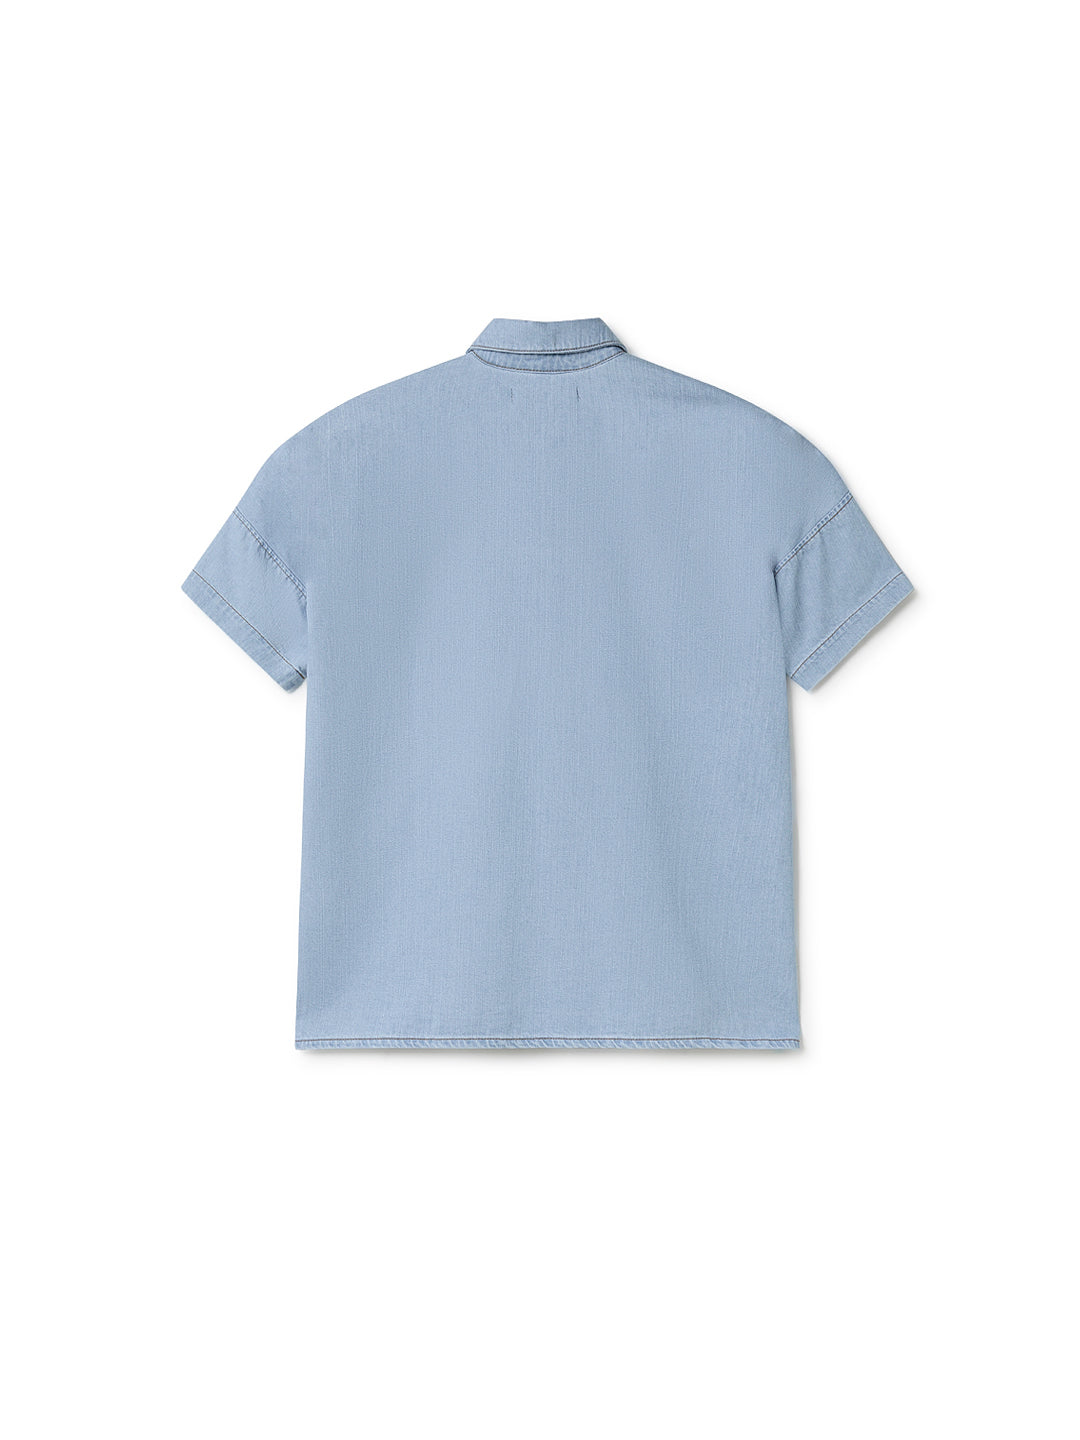 Paradise - Sky Blue | Fair Fashion by TWOTHIRDS